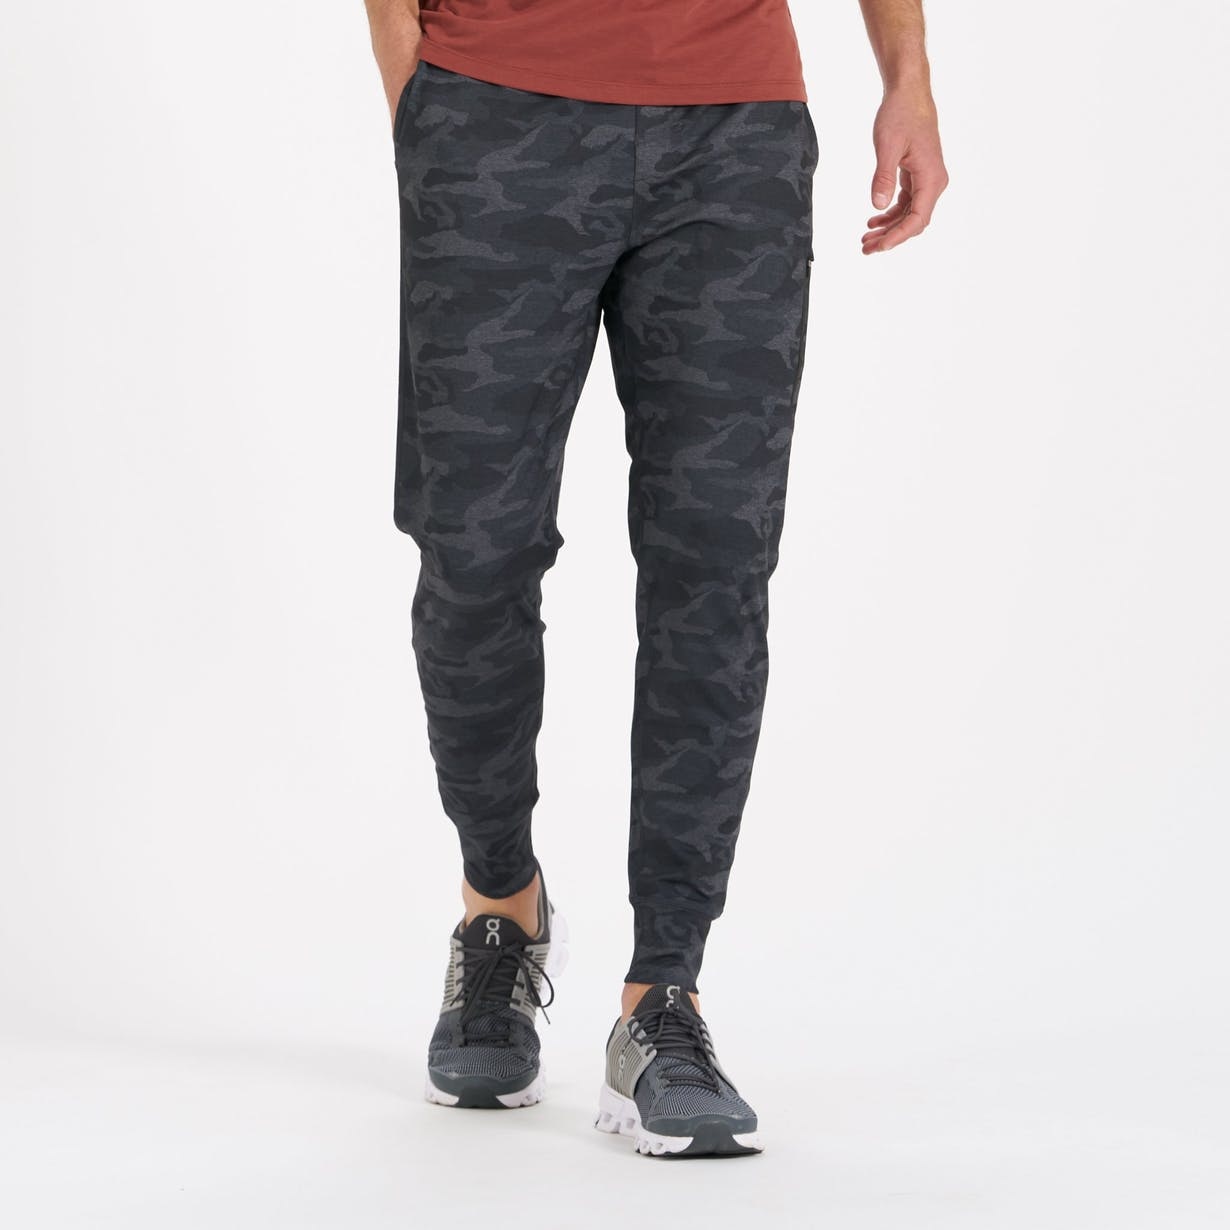 Men's Performance Training Joggers - Competitor Source